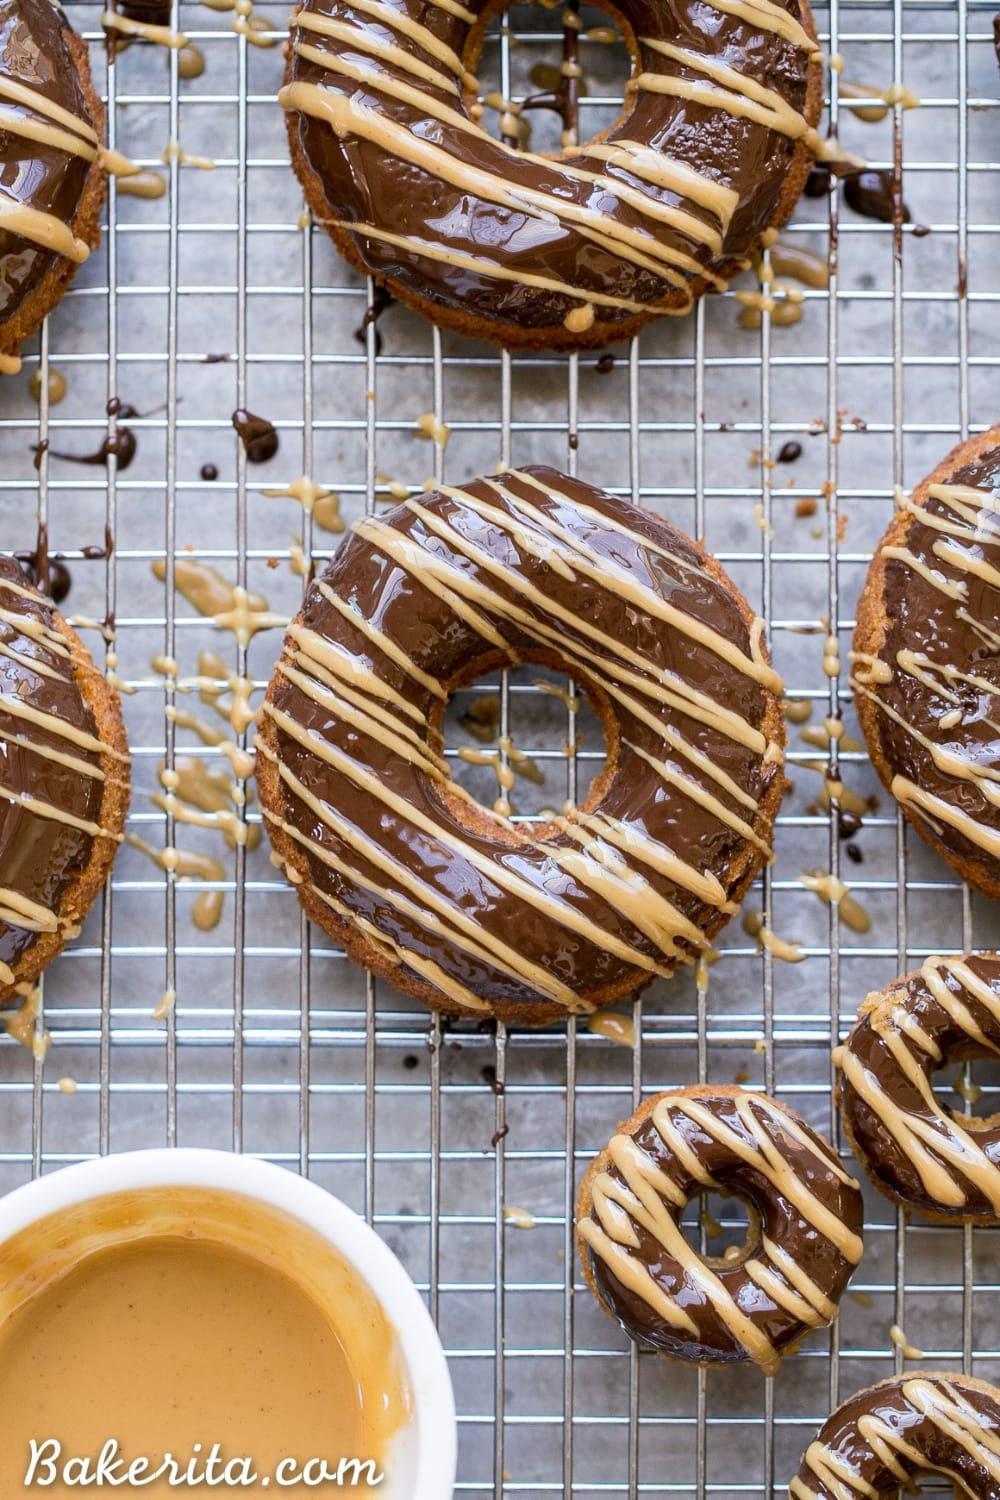 Baked Peanut Butter Banana Donuts with Chocolate Peanut Butter Glaze